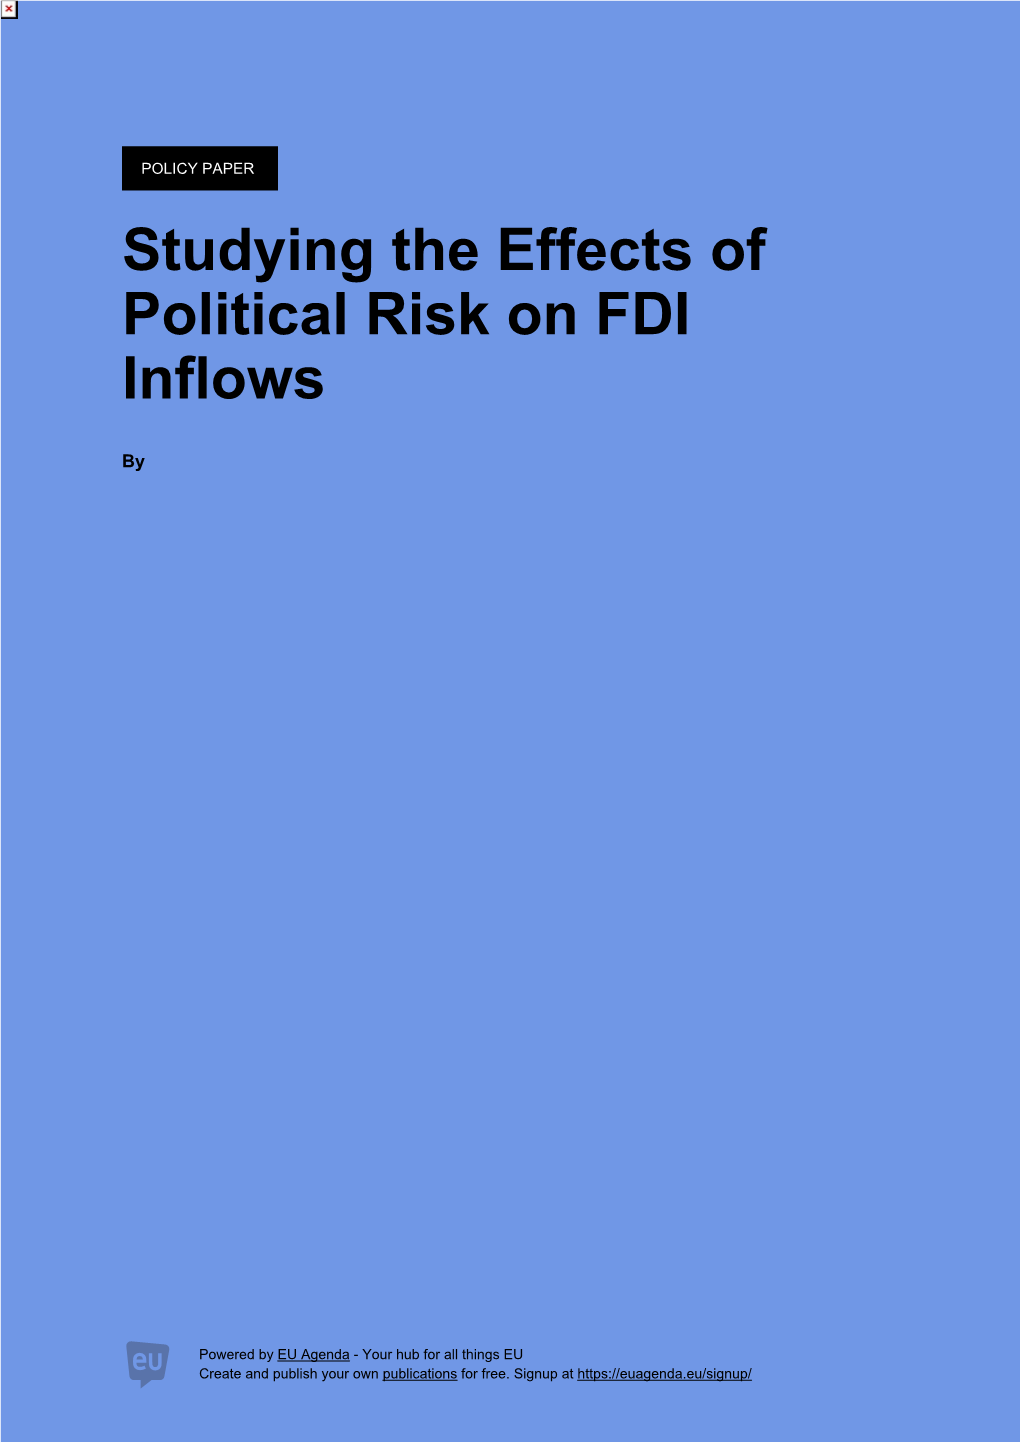 Studying the Effects of Political Risk on FDI Inflows